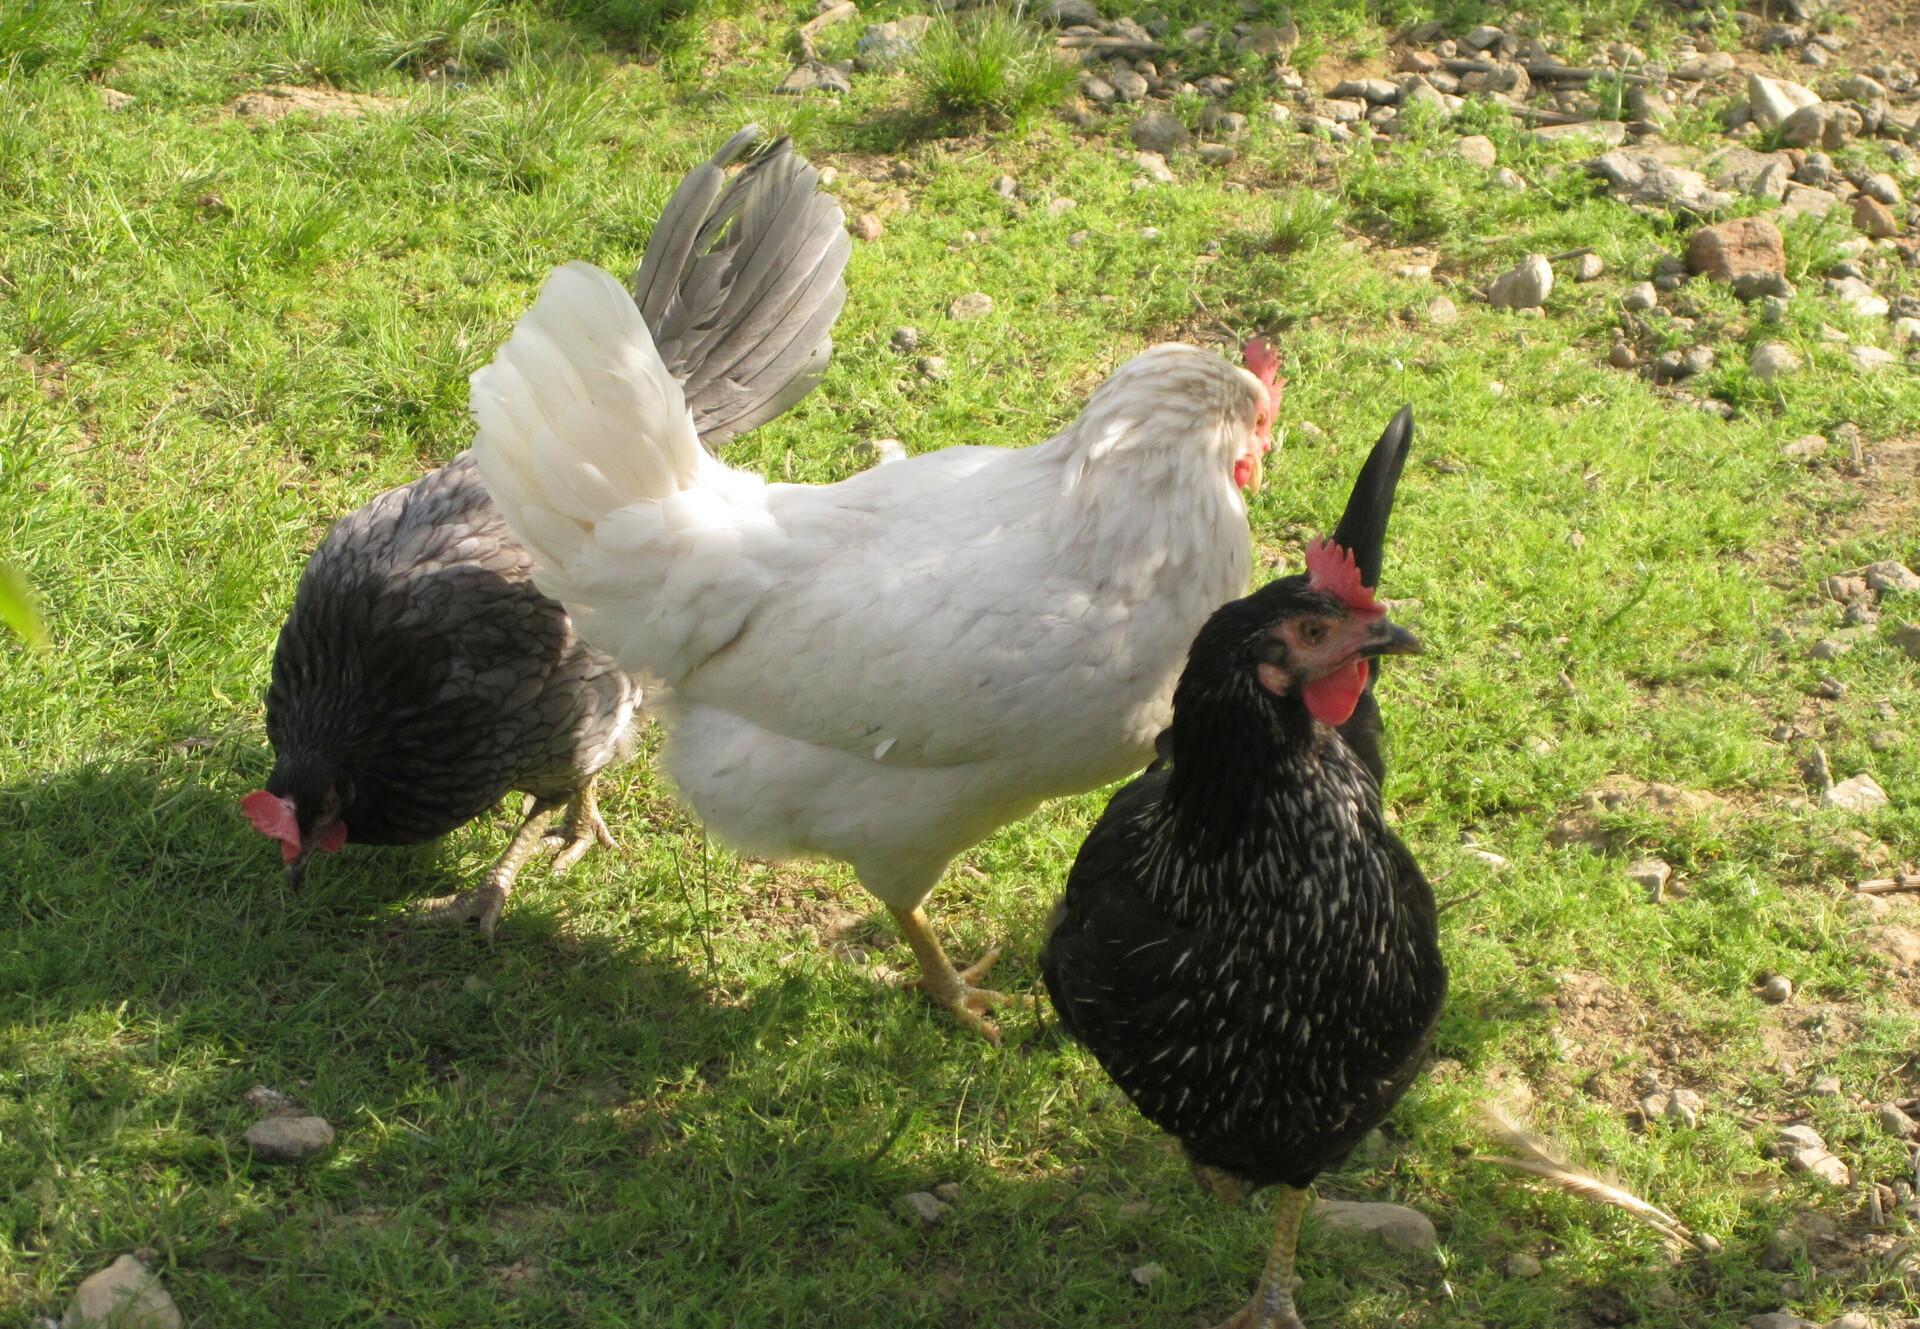 10 Facts About Chickens - FOUR PAWS Australia - Animal Welfare Charity